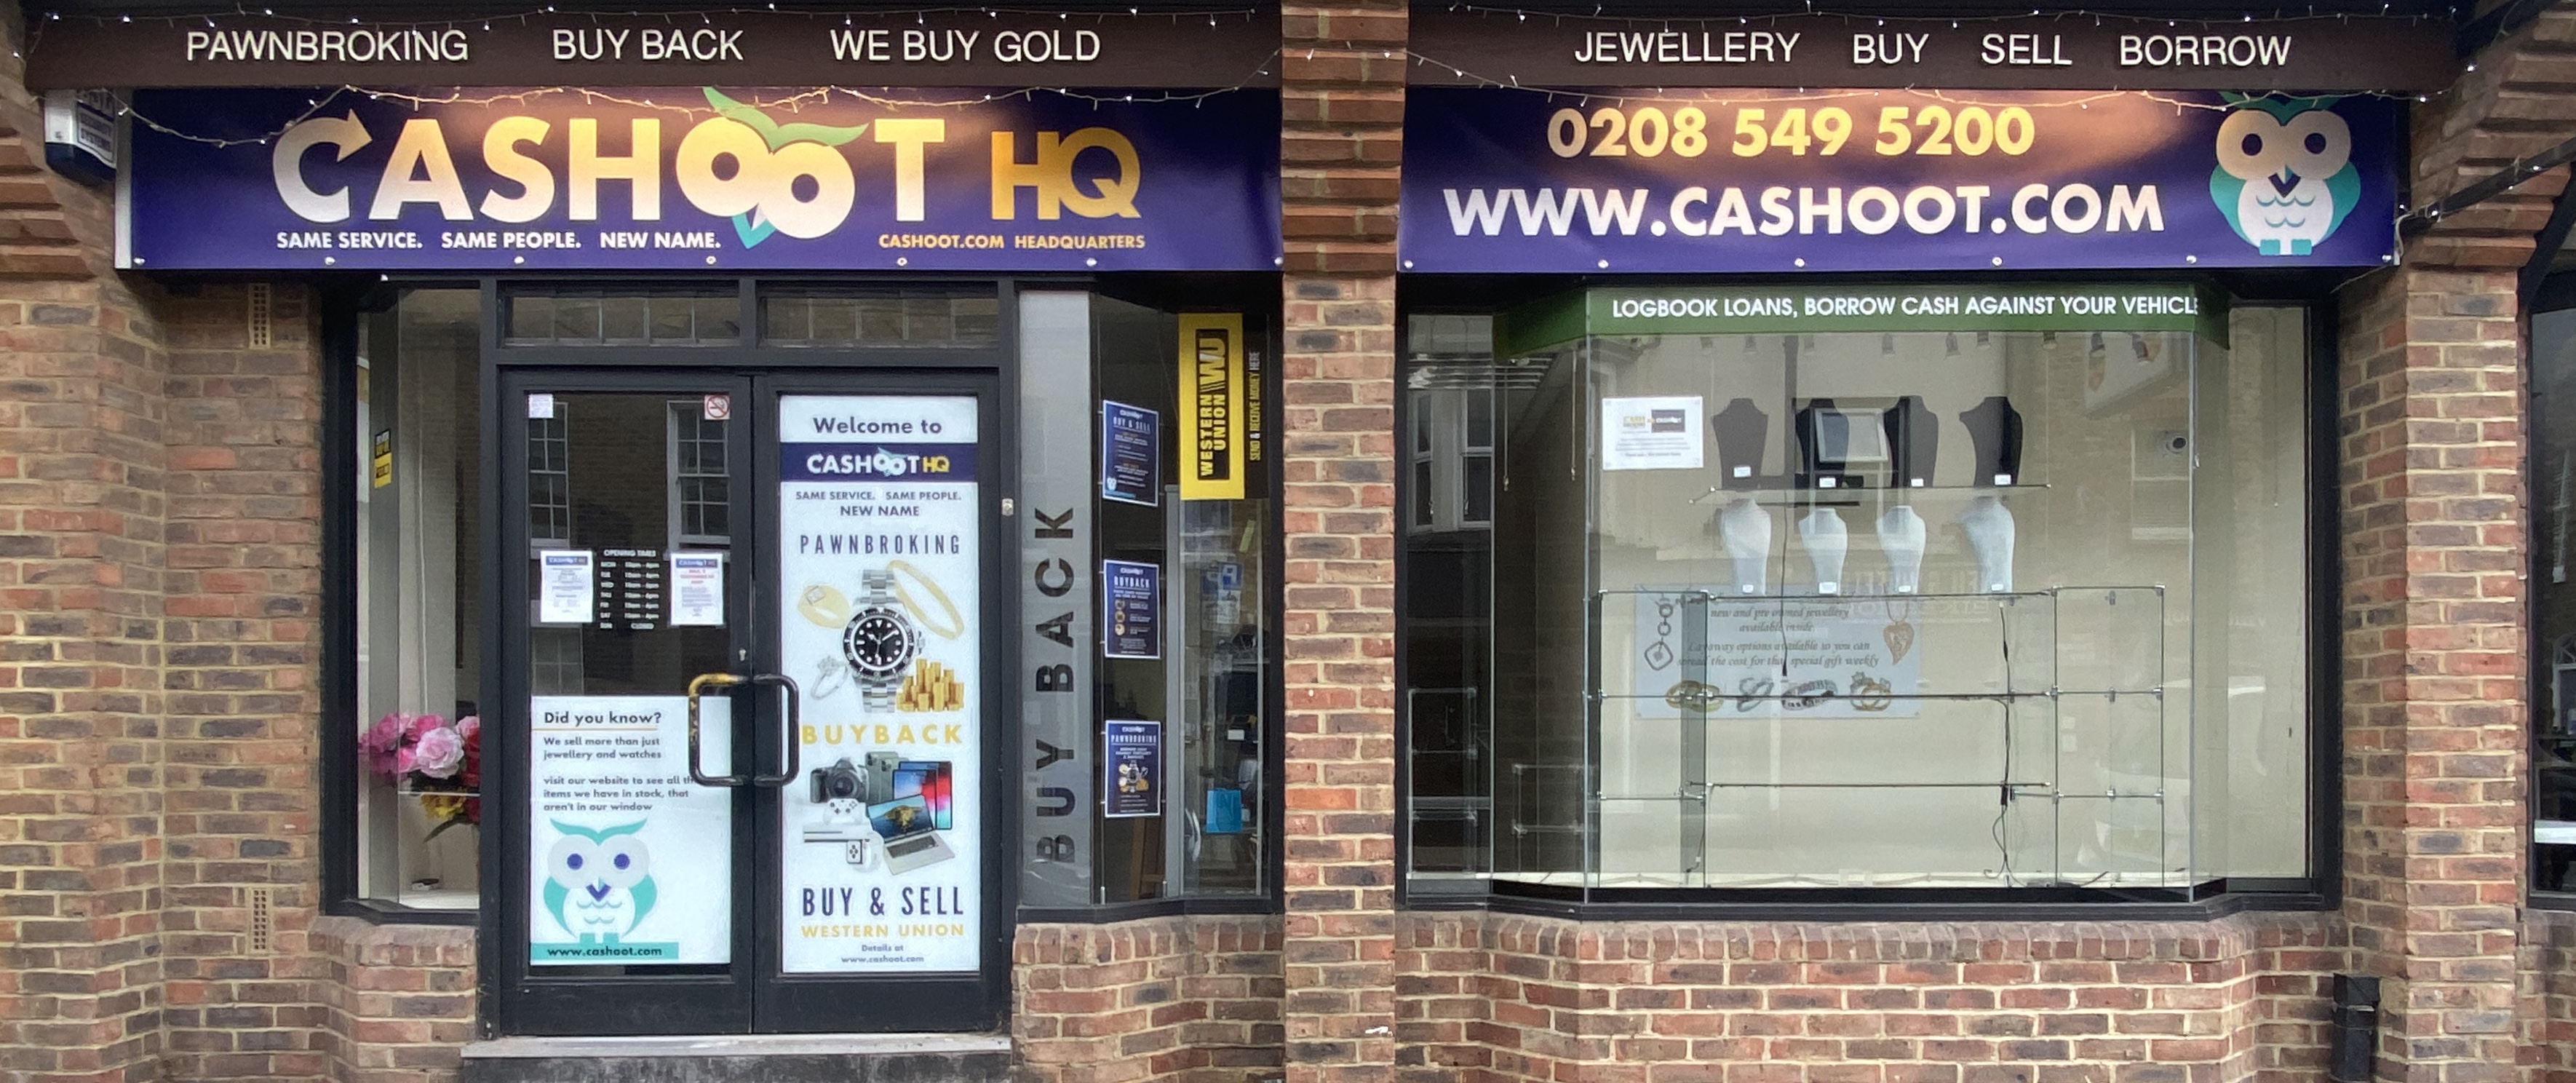 1. Come and see us at our Cashoot HQ in Kingston Upon Thames KT2 6QF (south west London area)